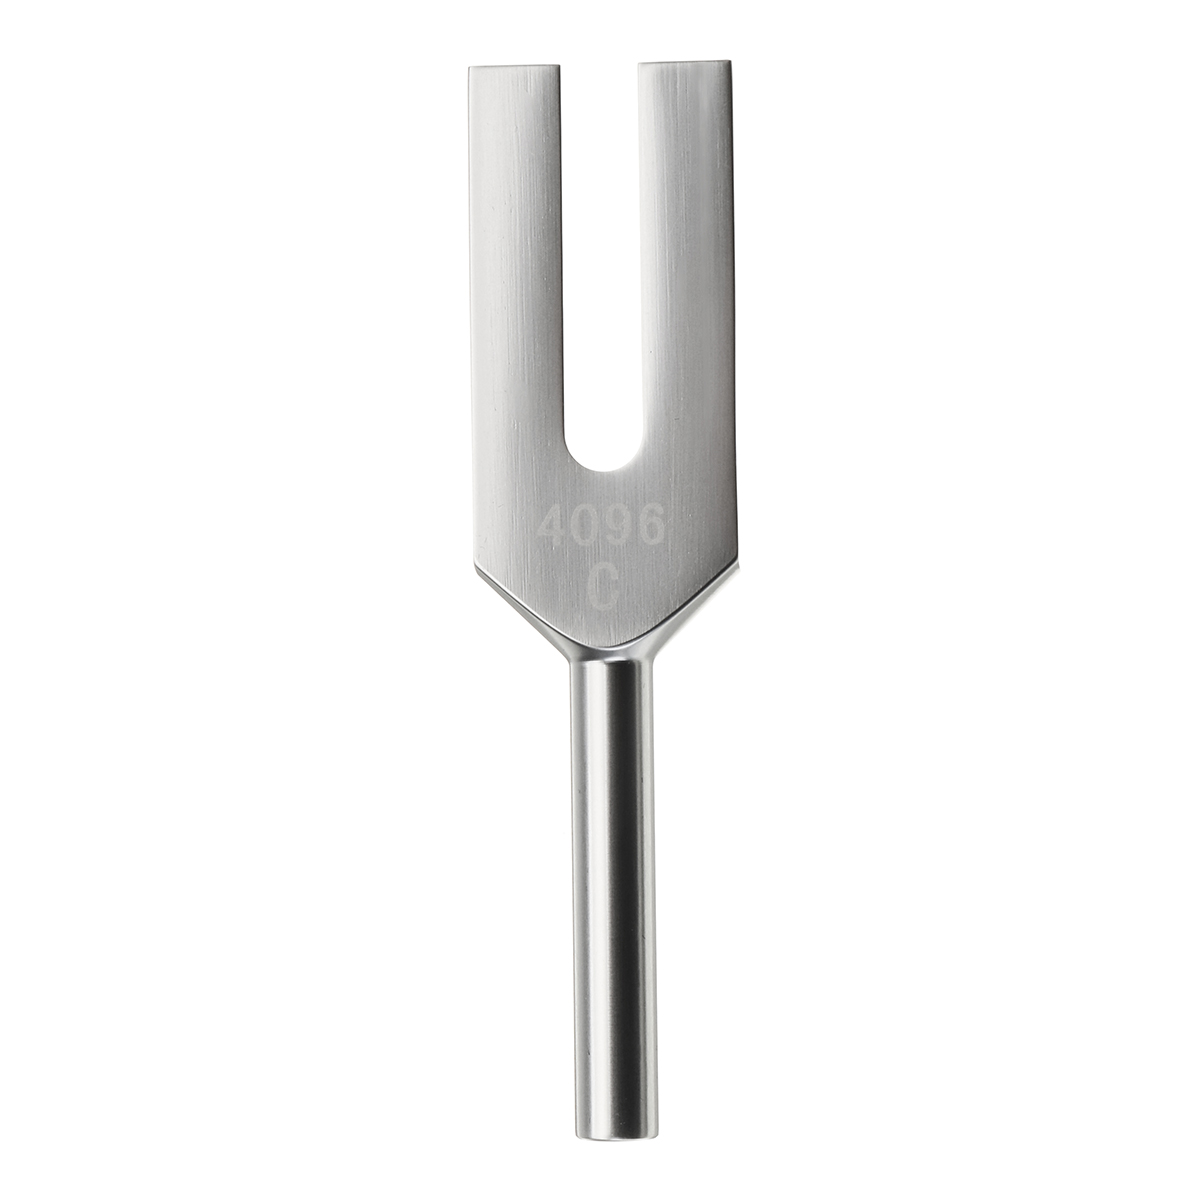 4096Hz-Aluminum-Musical-Tuning-Fork-Instrument-for-Healing-Sound-Vibration-Therapy-Tools-1282655-3